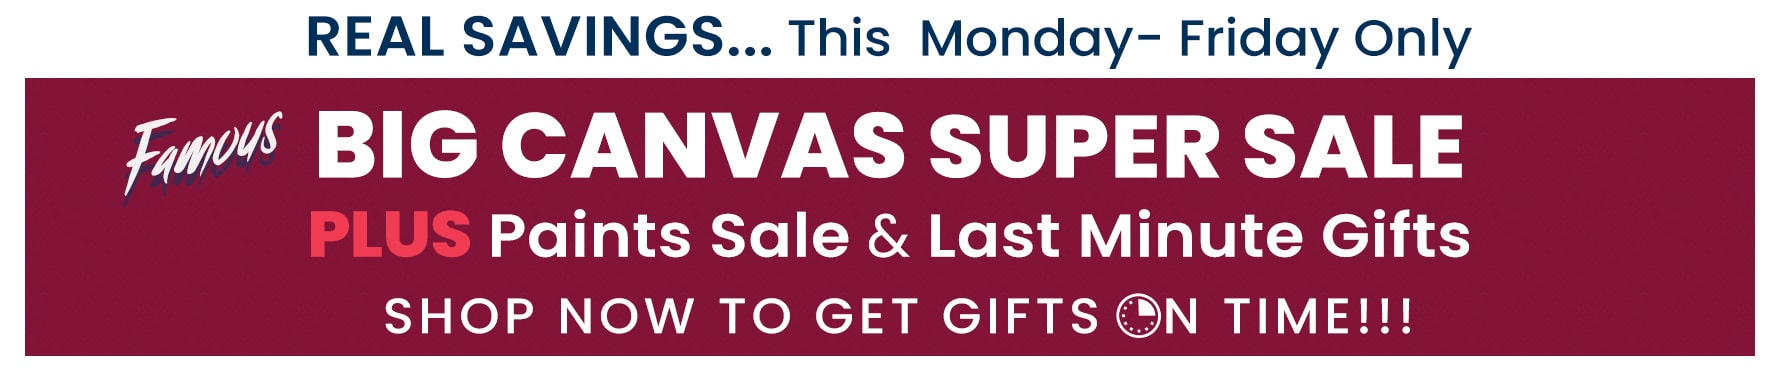 Famous Canvas Super Sale - Prices Reduced - No Coupon Needed